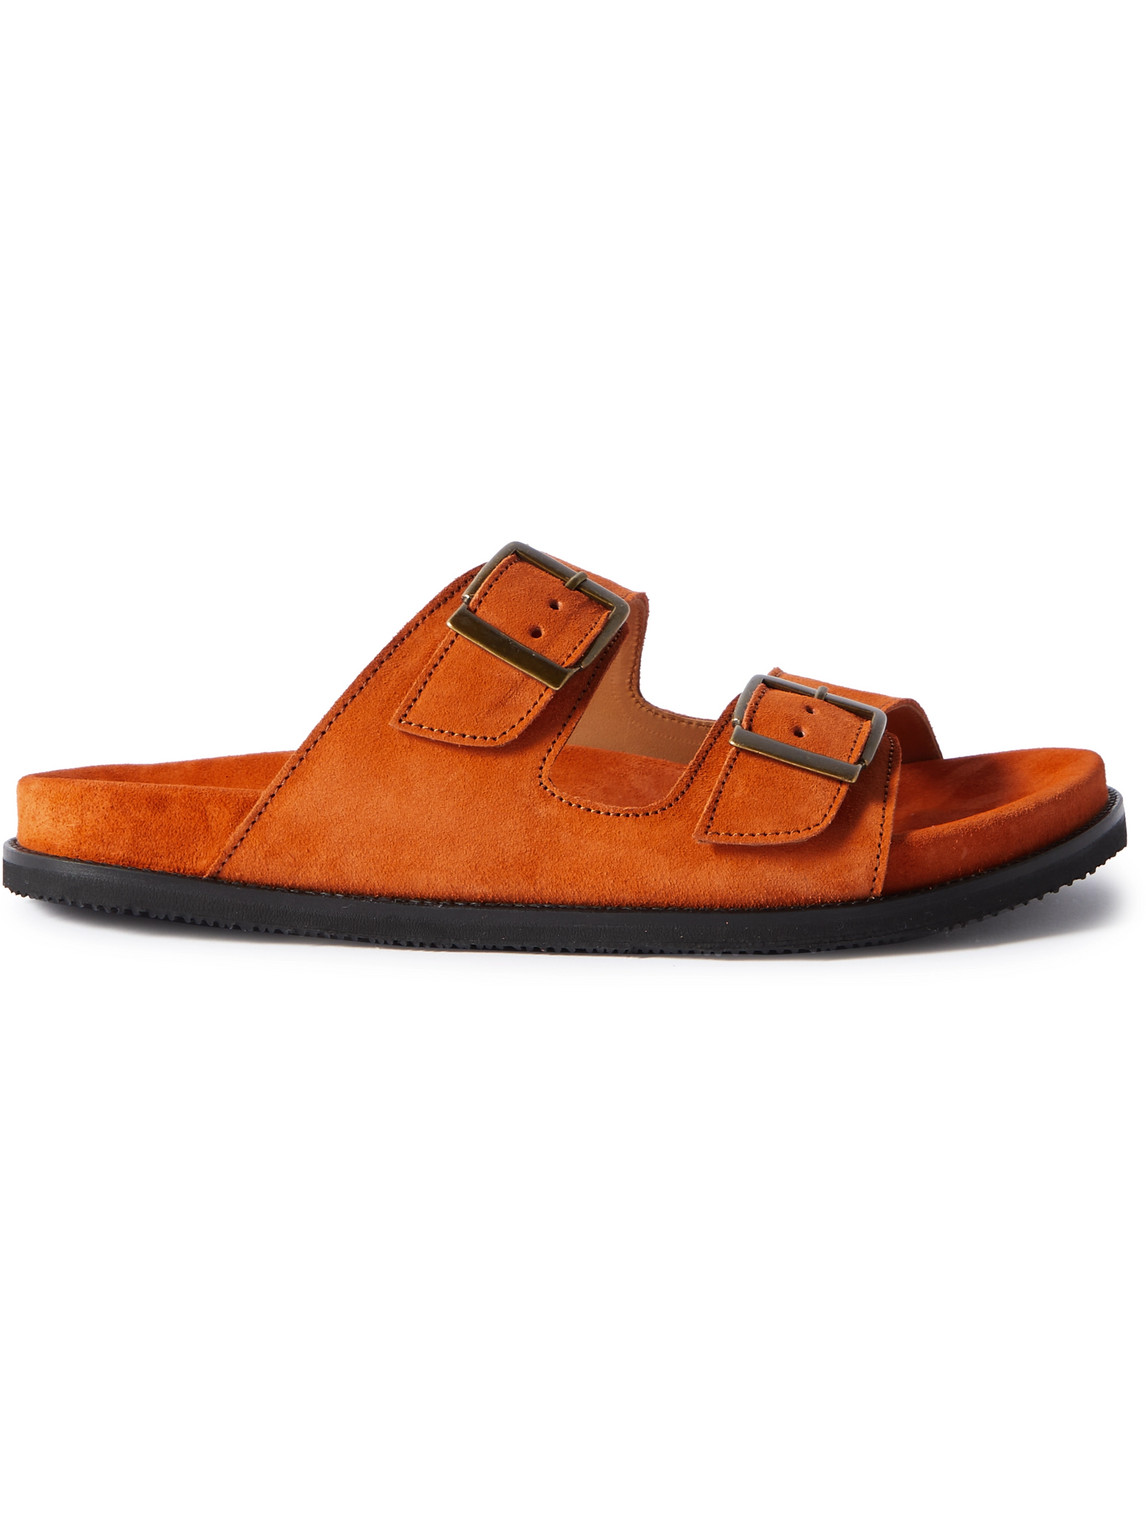 David Regenerated Suede By Evolo® Sandals in Orange for Men MR P Mens Shoes Slip-on shoes Slippers 